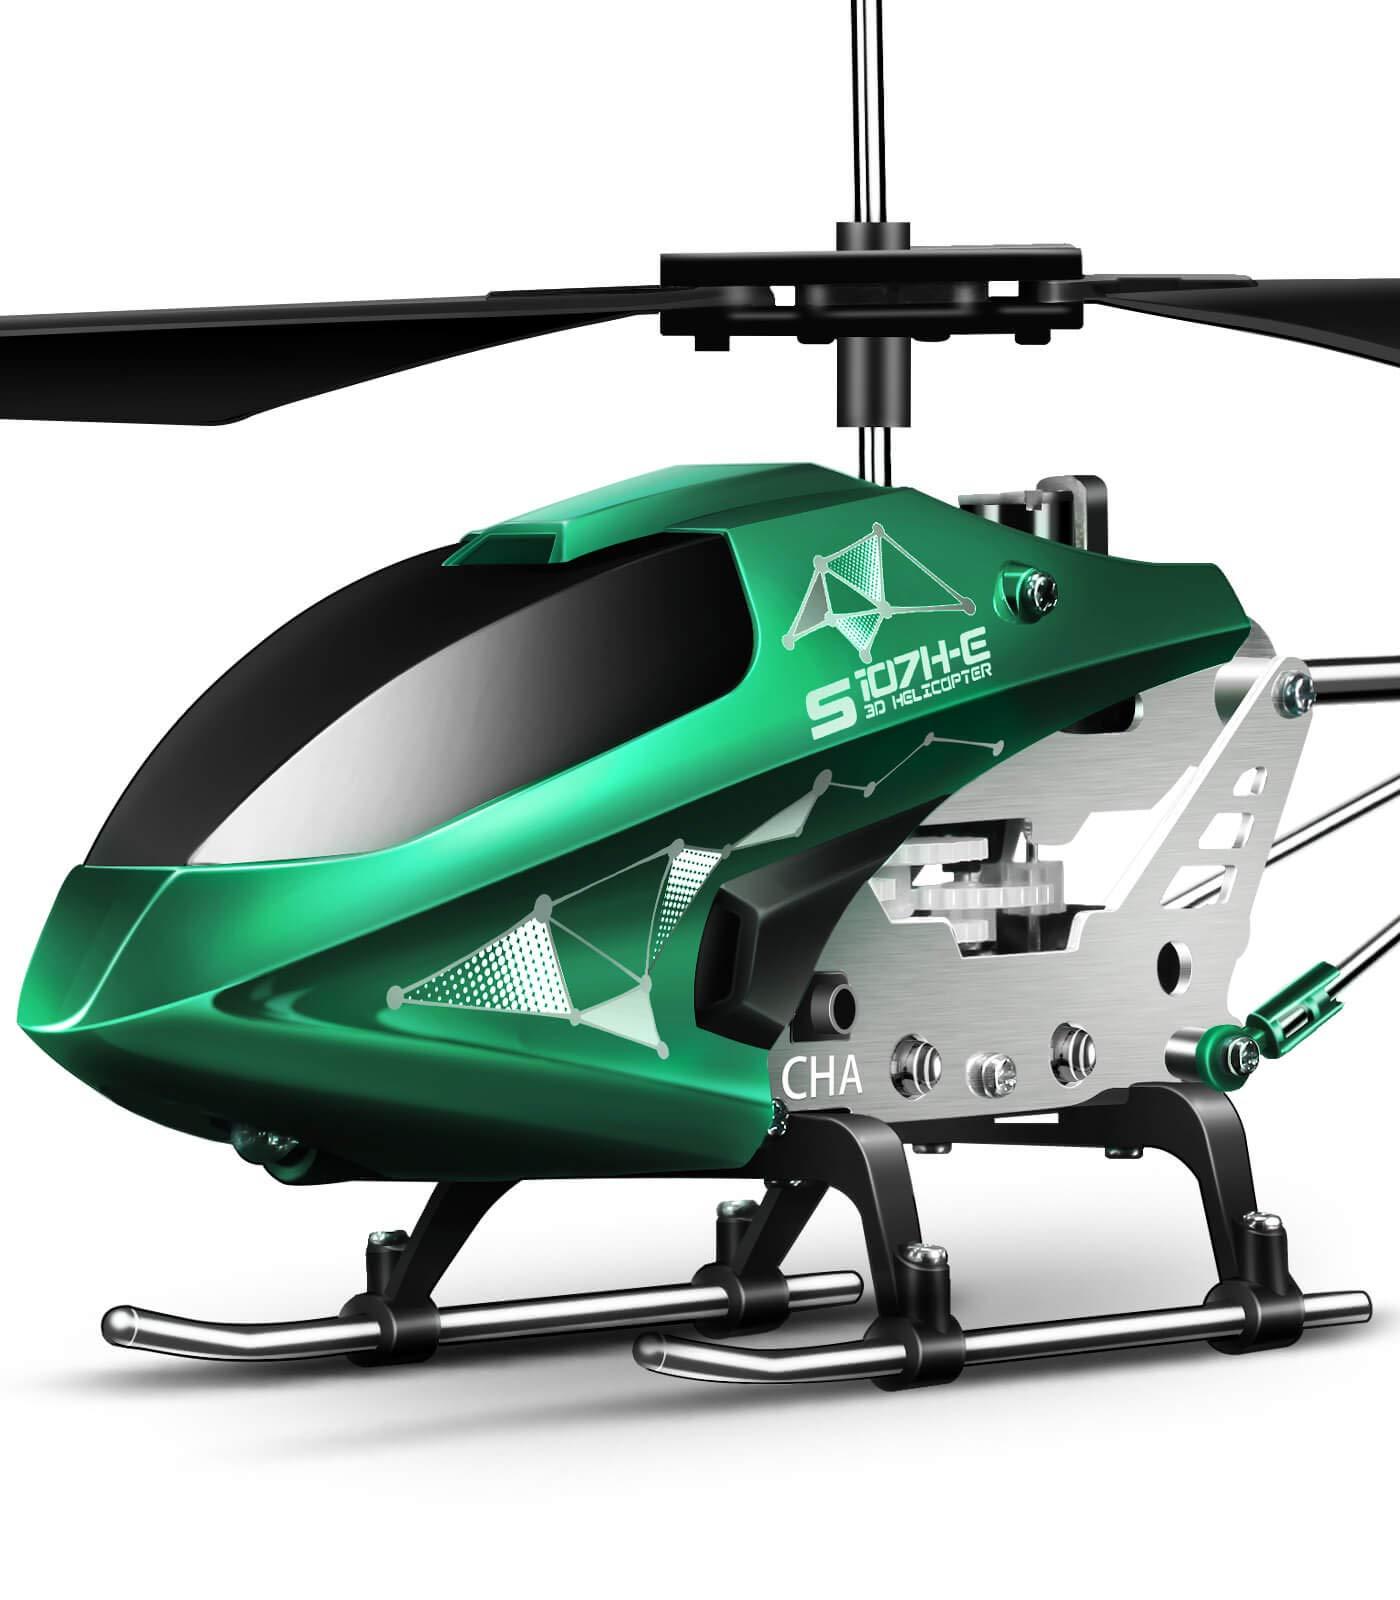 High Speed Remote Control Helicopter: Choosing the right high-speed RC helicopter for you